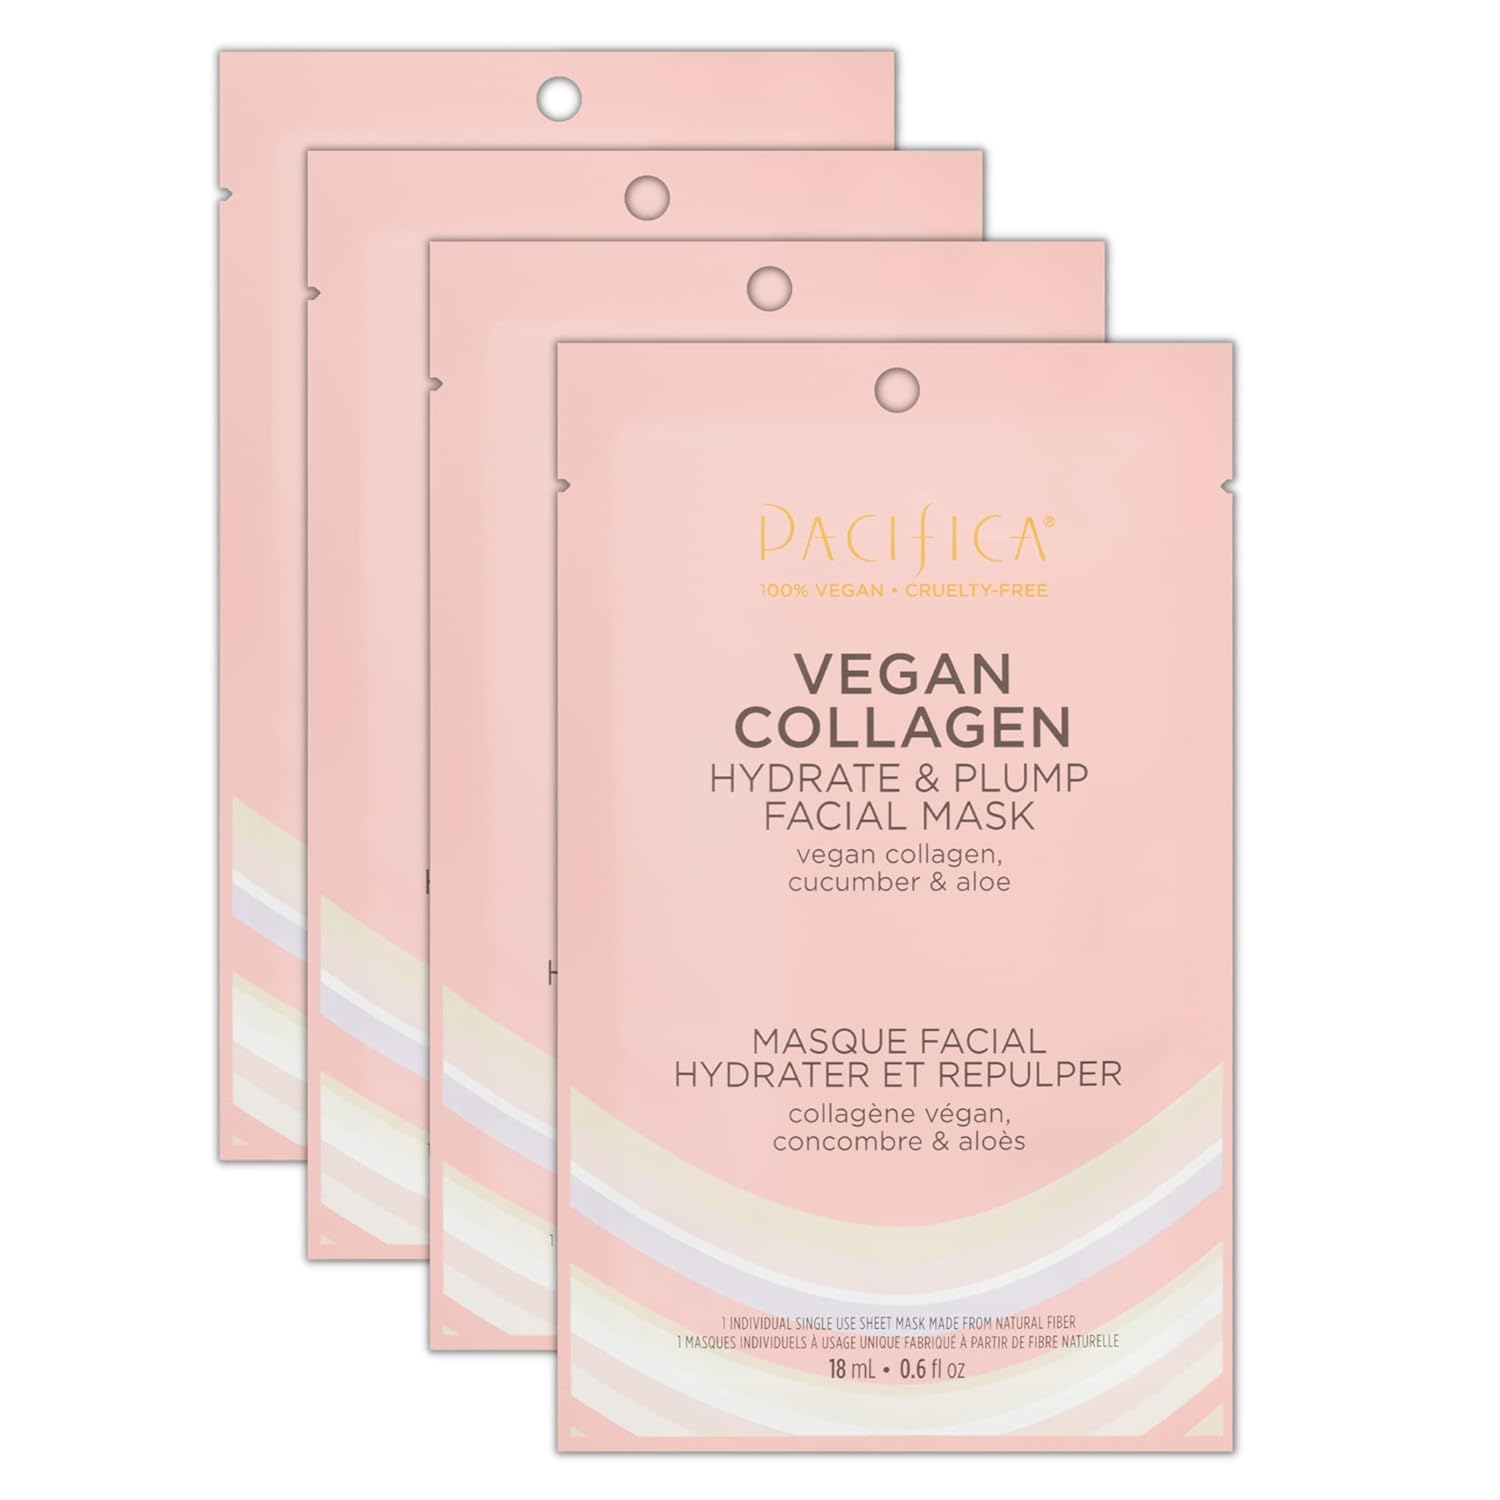 Pacifica Beauty, Vegan Collagen Hydrate & Plump Face Mask, Sheet Mask Set, Skincare, Moisturizer, Hydrated Dewy Skin, Cucumber & Aloe, For Dry & Aging Skin, 4 Pack, Vegan